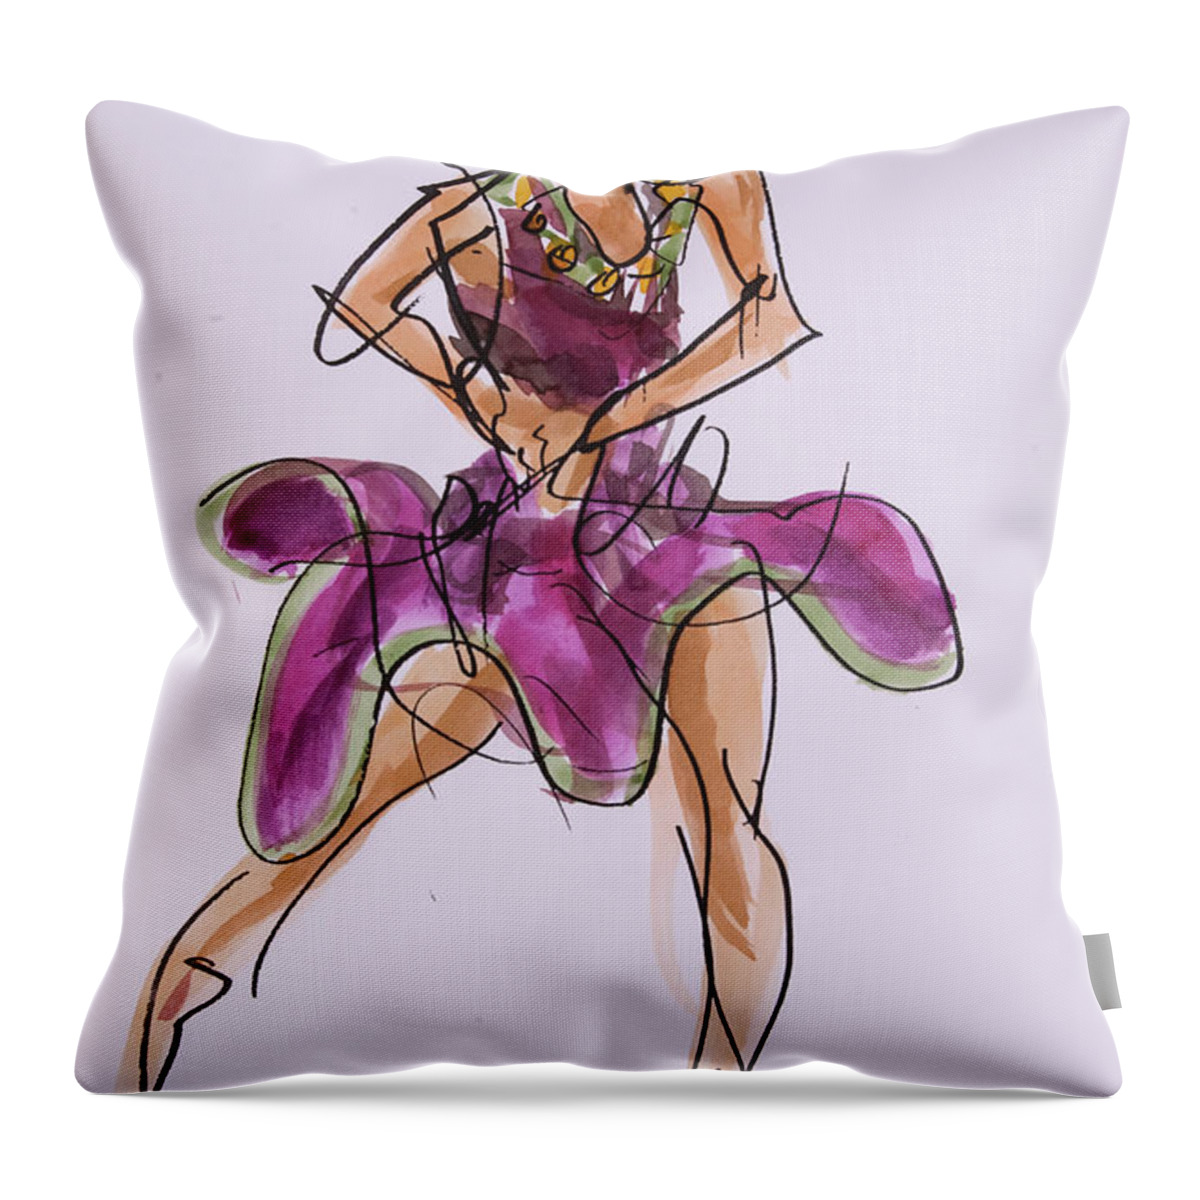 Shepherdesses Throw Pillow featuring the drawing Pirates dance at their capture by Peregrine Roskilly